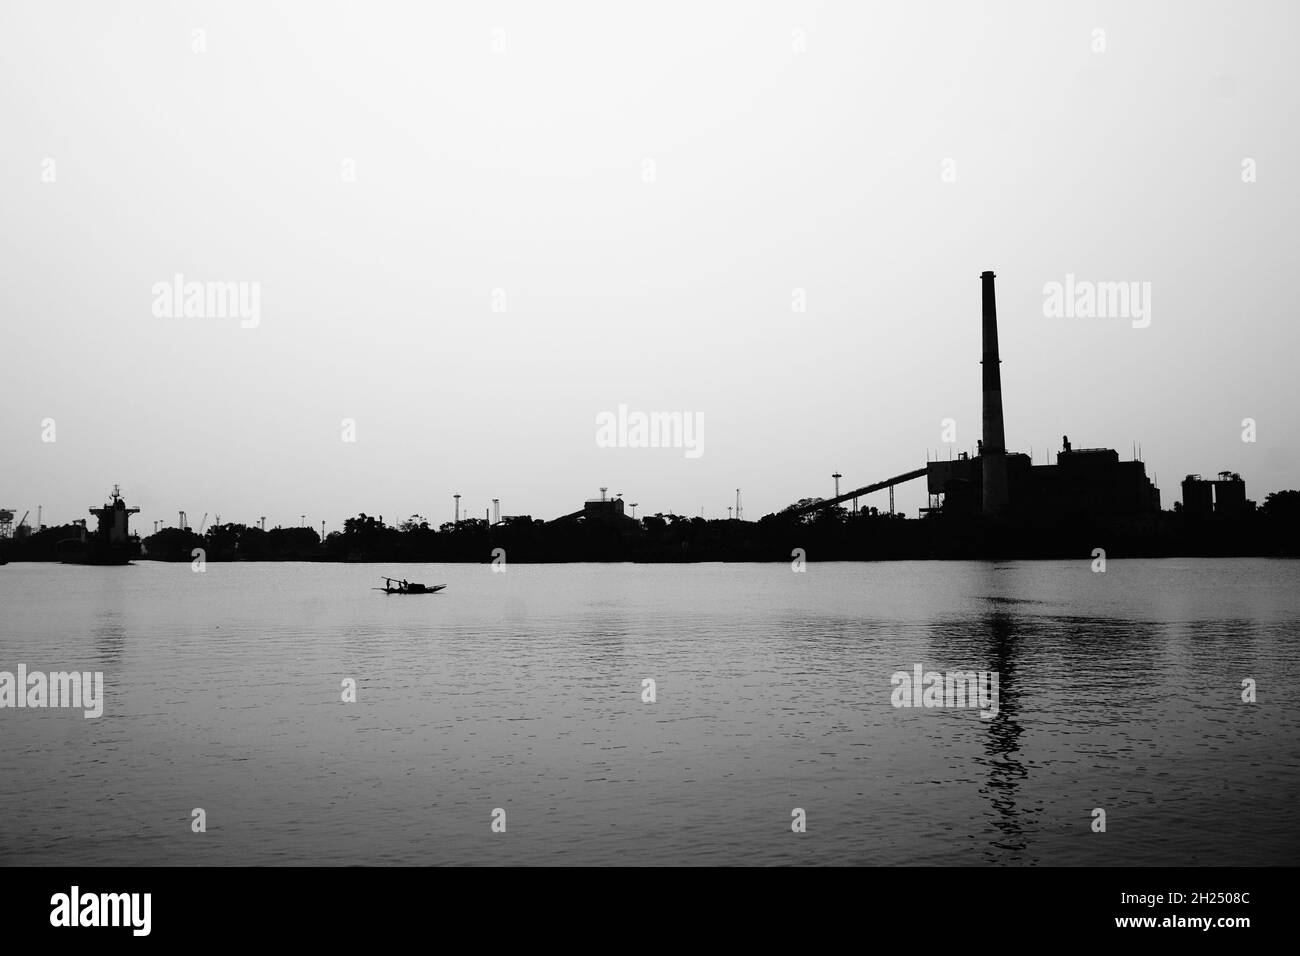 Ganges river in black and white with Industrial background, High contrast image, Stock Photo